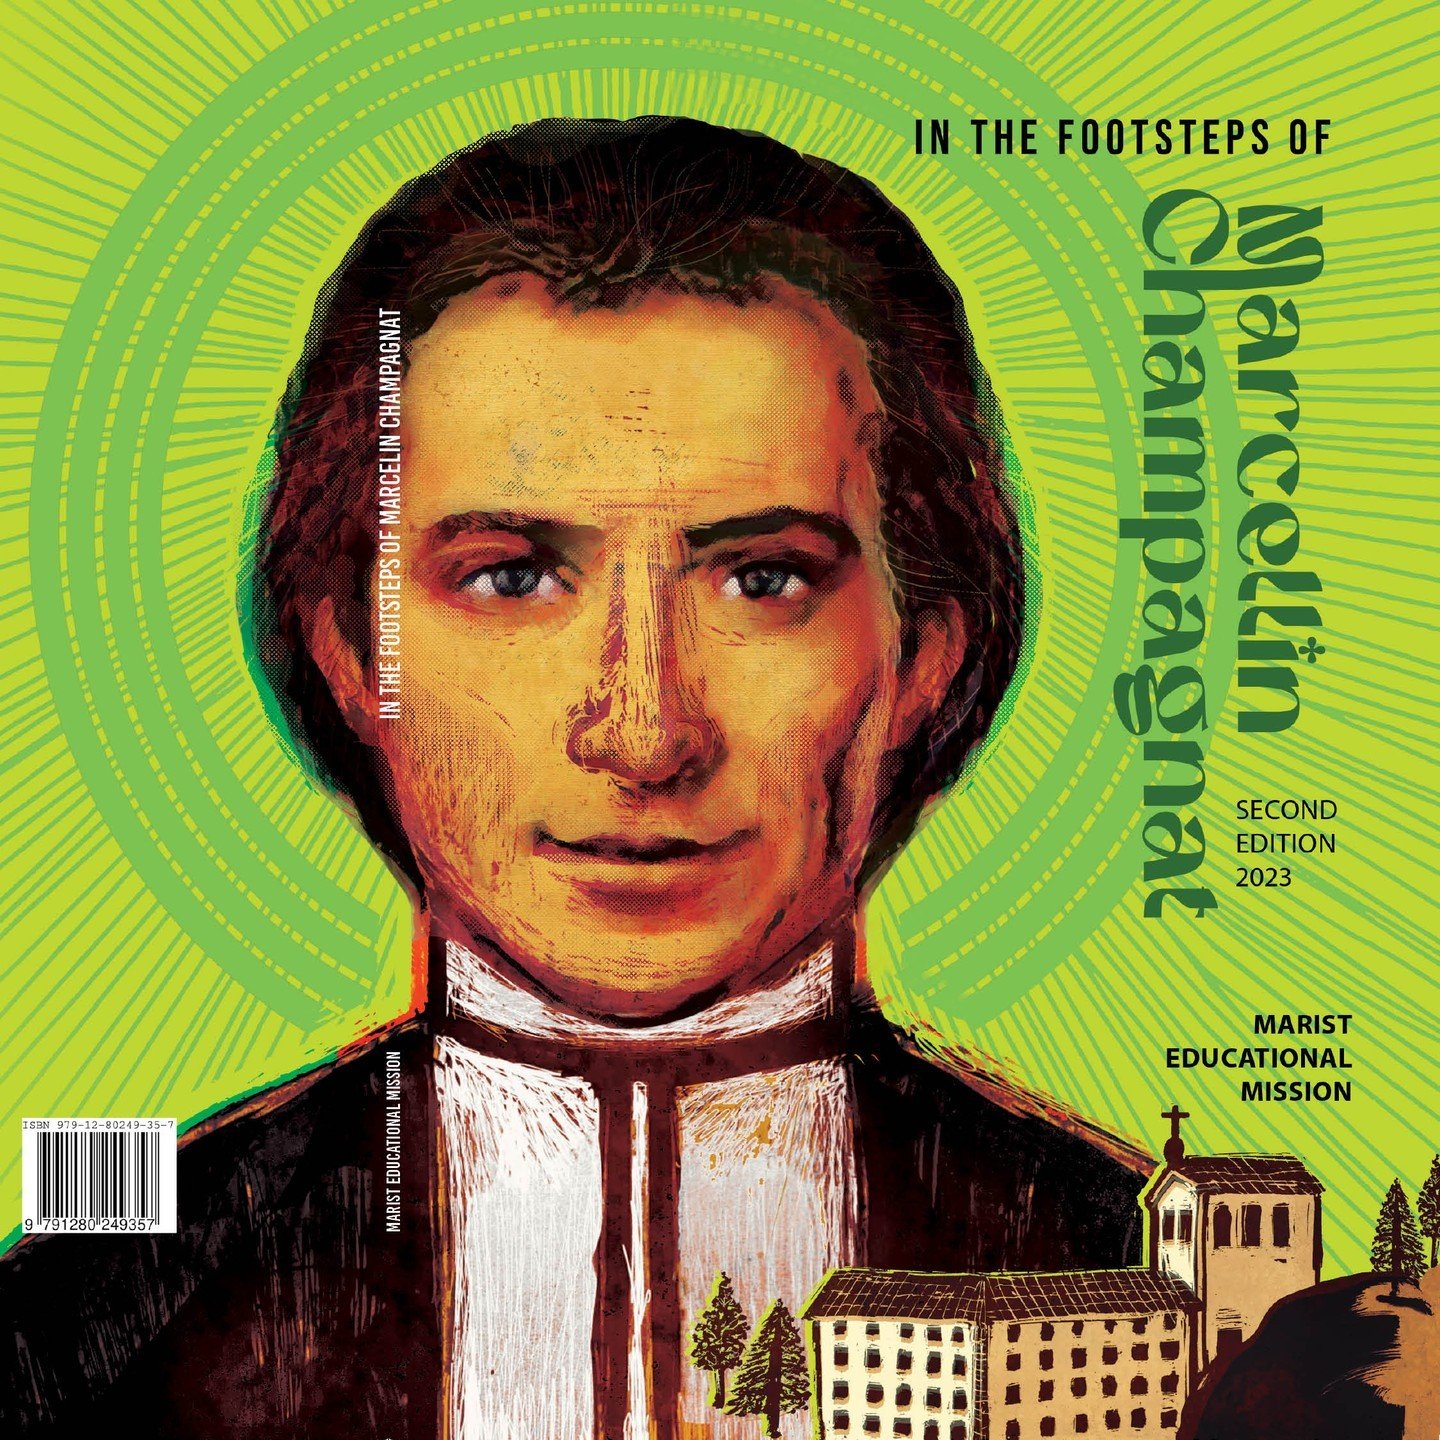 Updated version of 'In the Footsteps of Marcellin Champagnat'
To mark the 25th anniversary of the publication of In the Footsteps, and to reflect the realities of Marist education from a  contemporary perspective, this new version was released on the